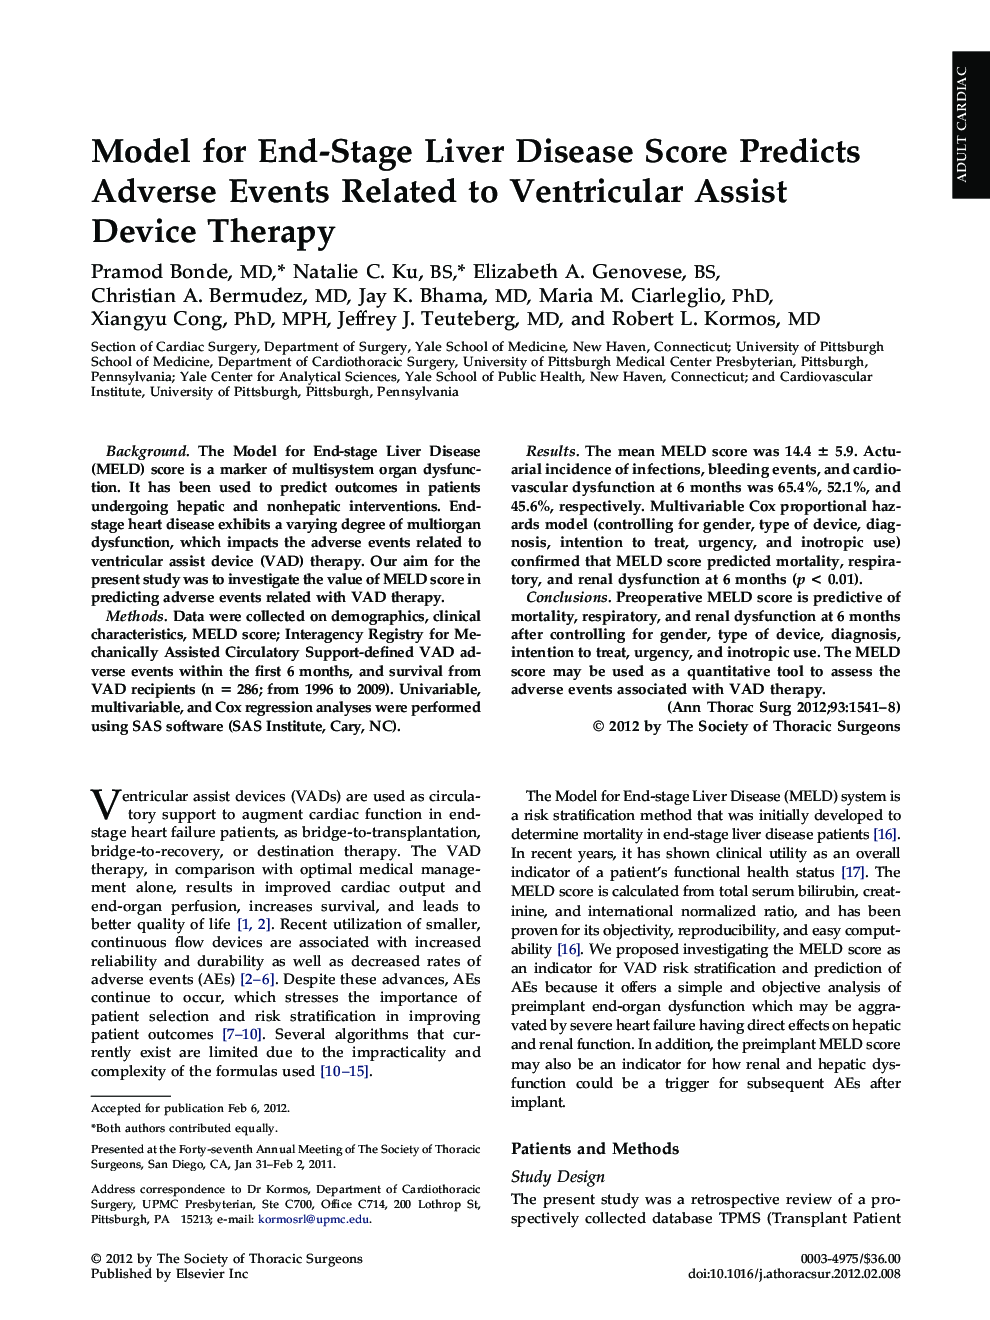 Model for End-Stage Liver Disease Score Predicts Adverse Events Related to Ventricular Assist Device Therapy